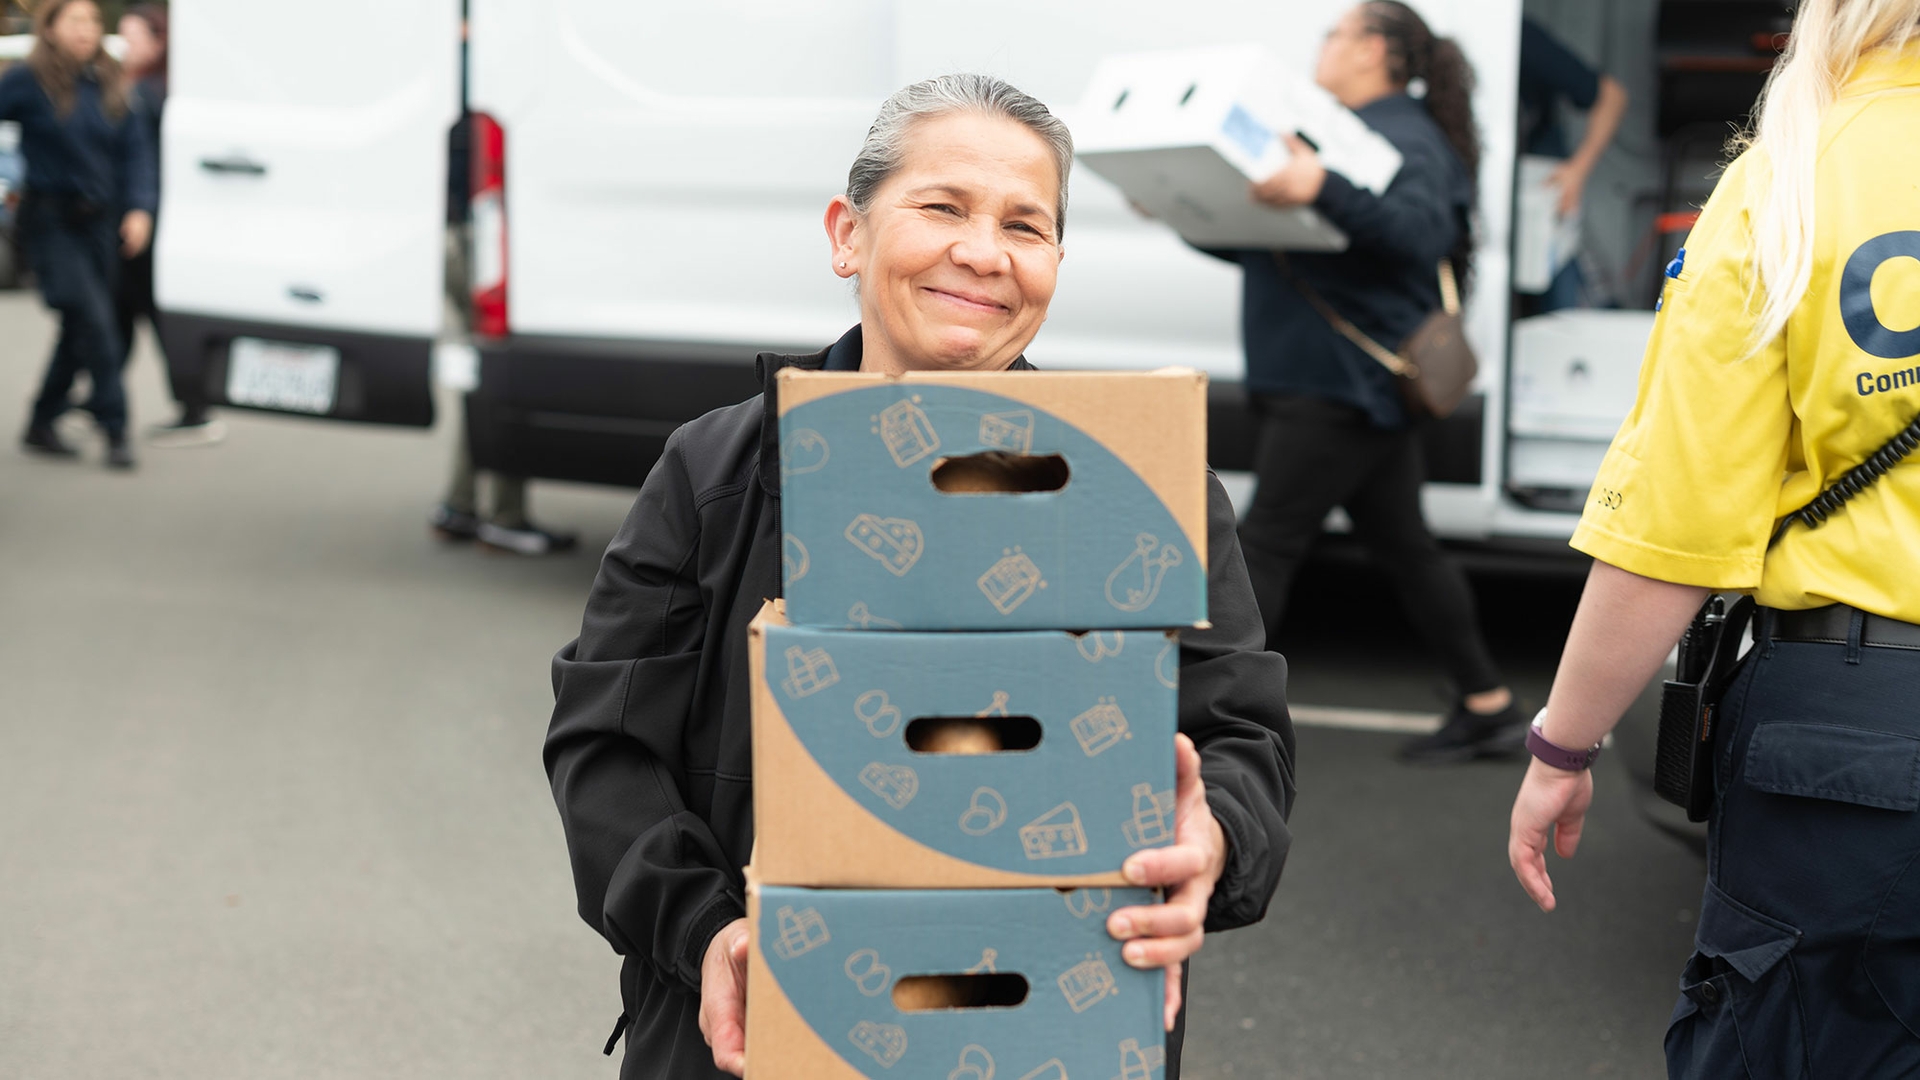 A volunteer wearing a black jacket smiles at the camera while carrying a stack of three cardboard boxes.